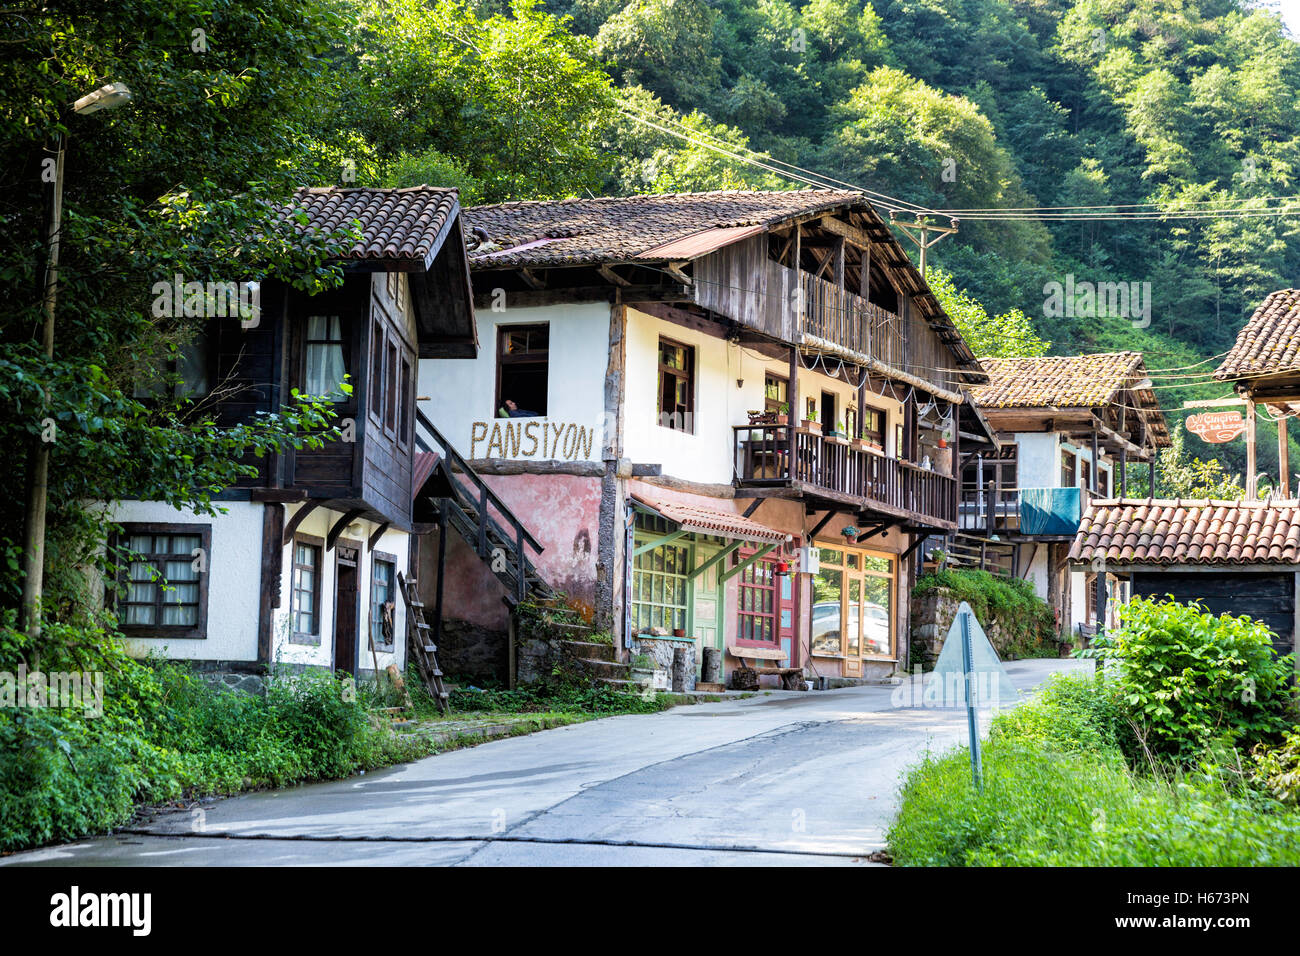 Senyuva village in Camlihemsin. Camlihemsin is a small town and district of Rize Province in the Black Sea region of Turkey. Stock Photo